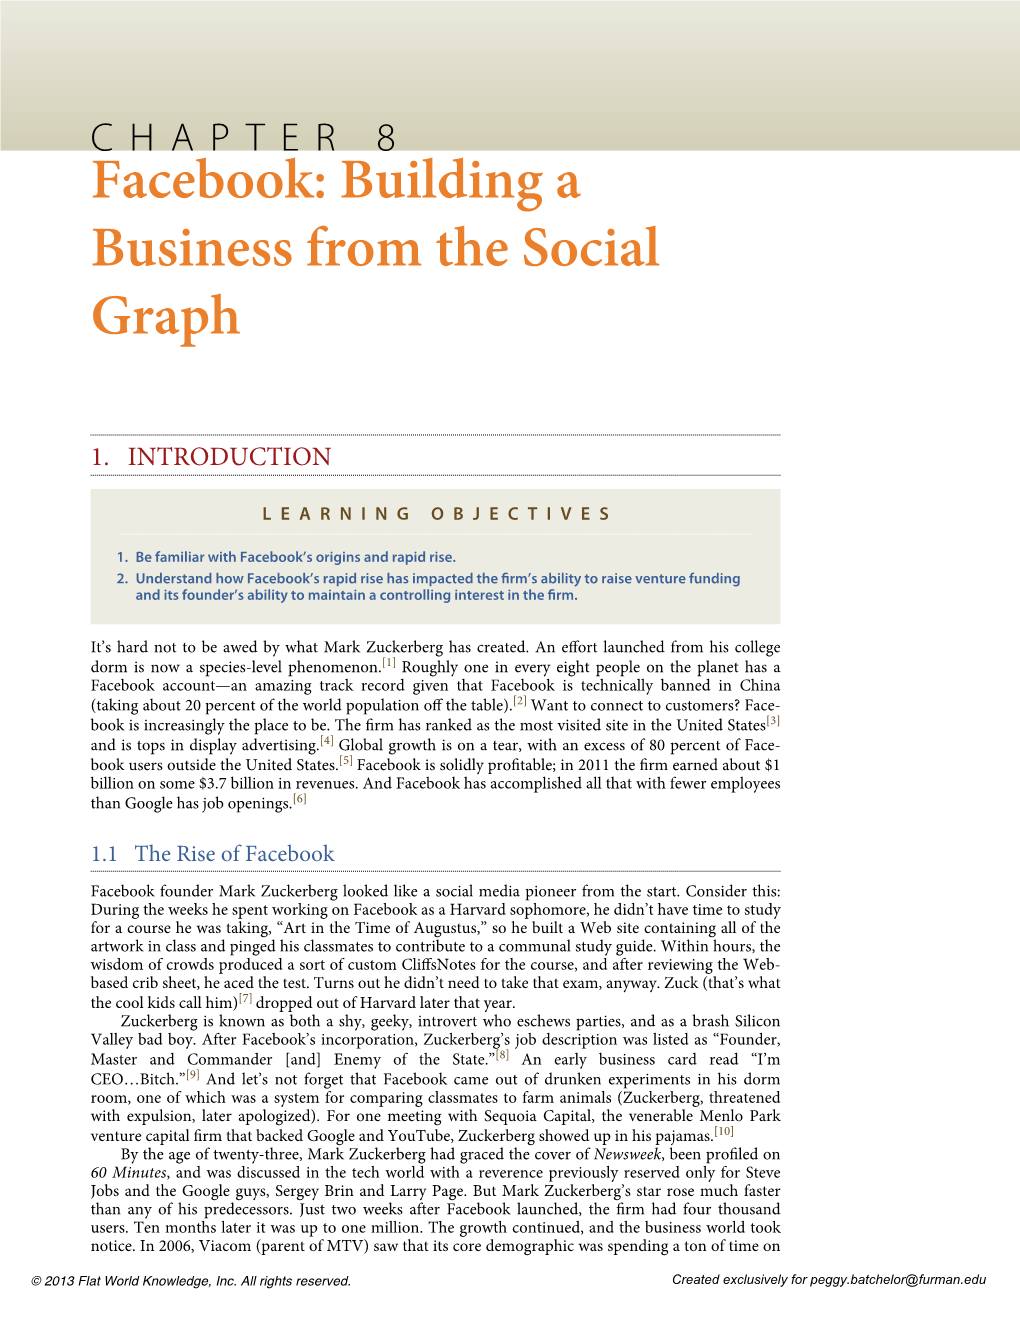 Facebook: Building a Business from the Social Graph